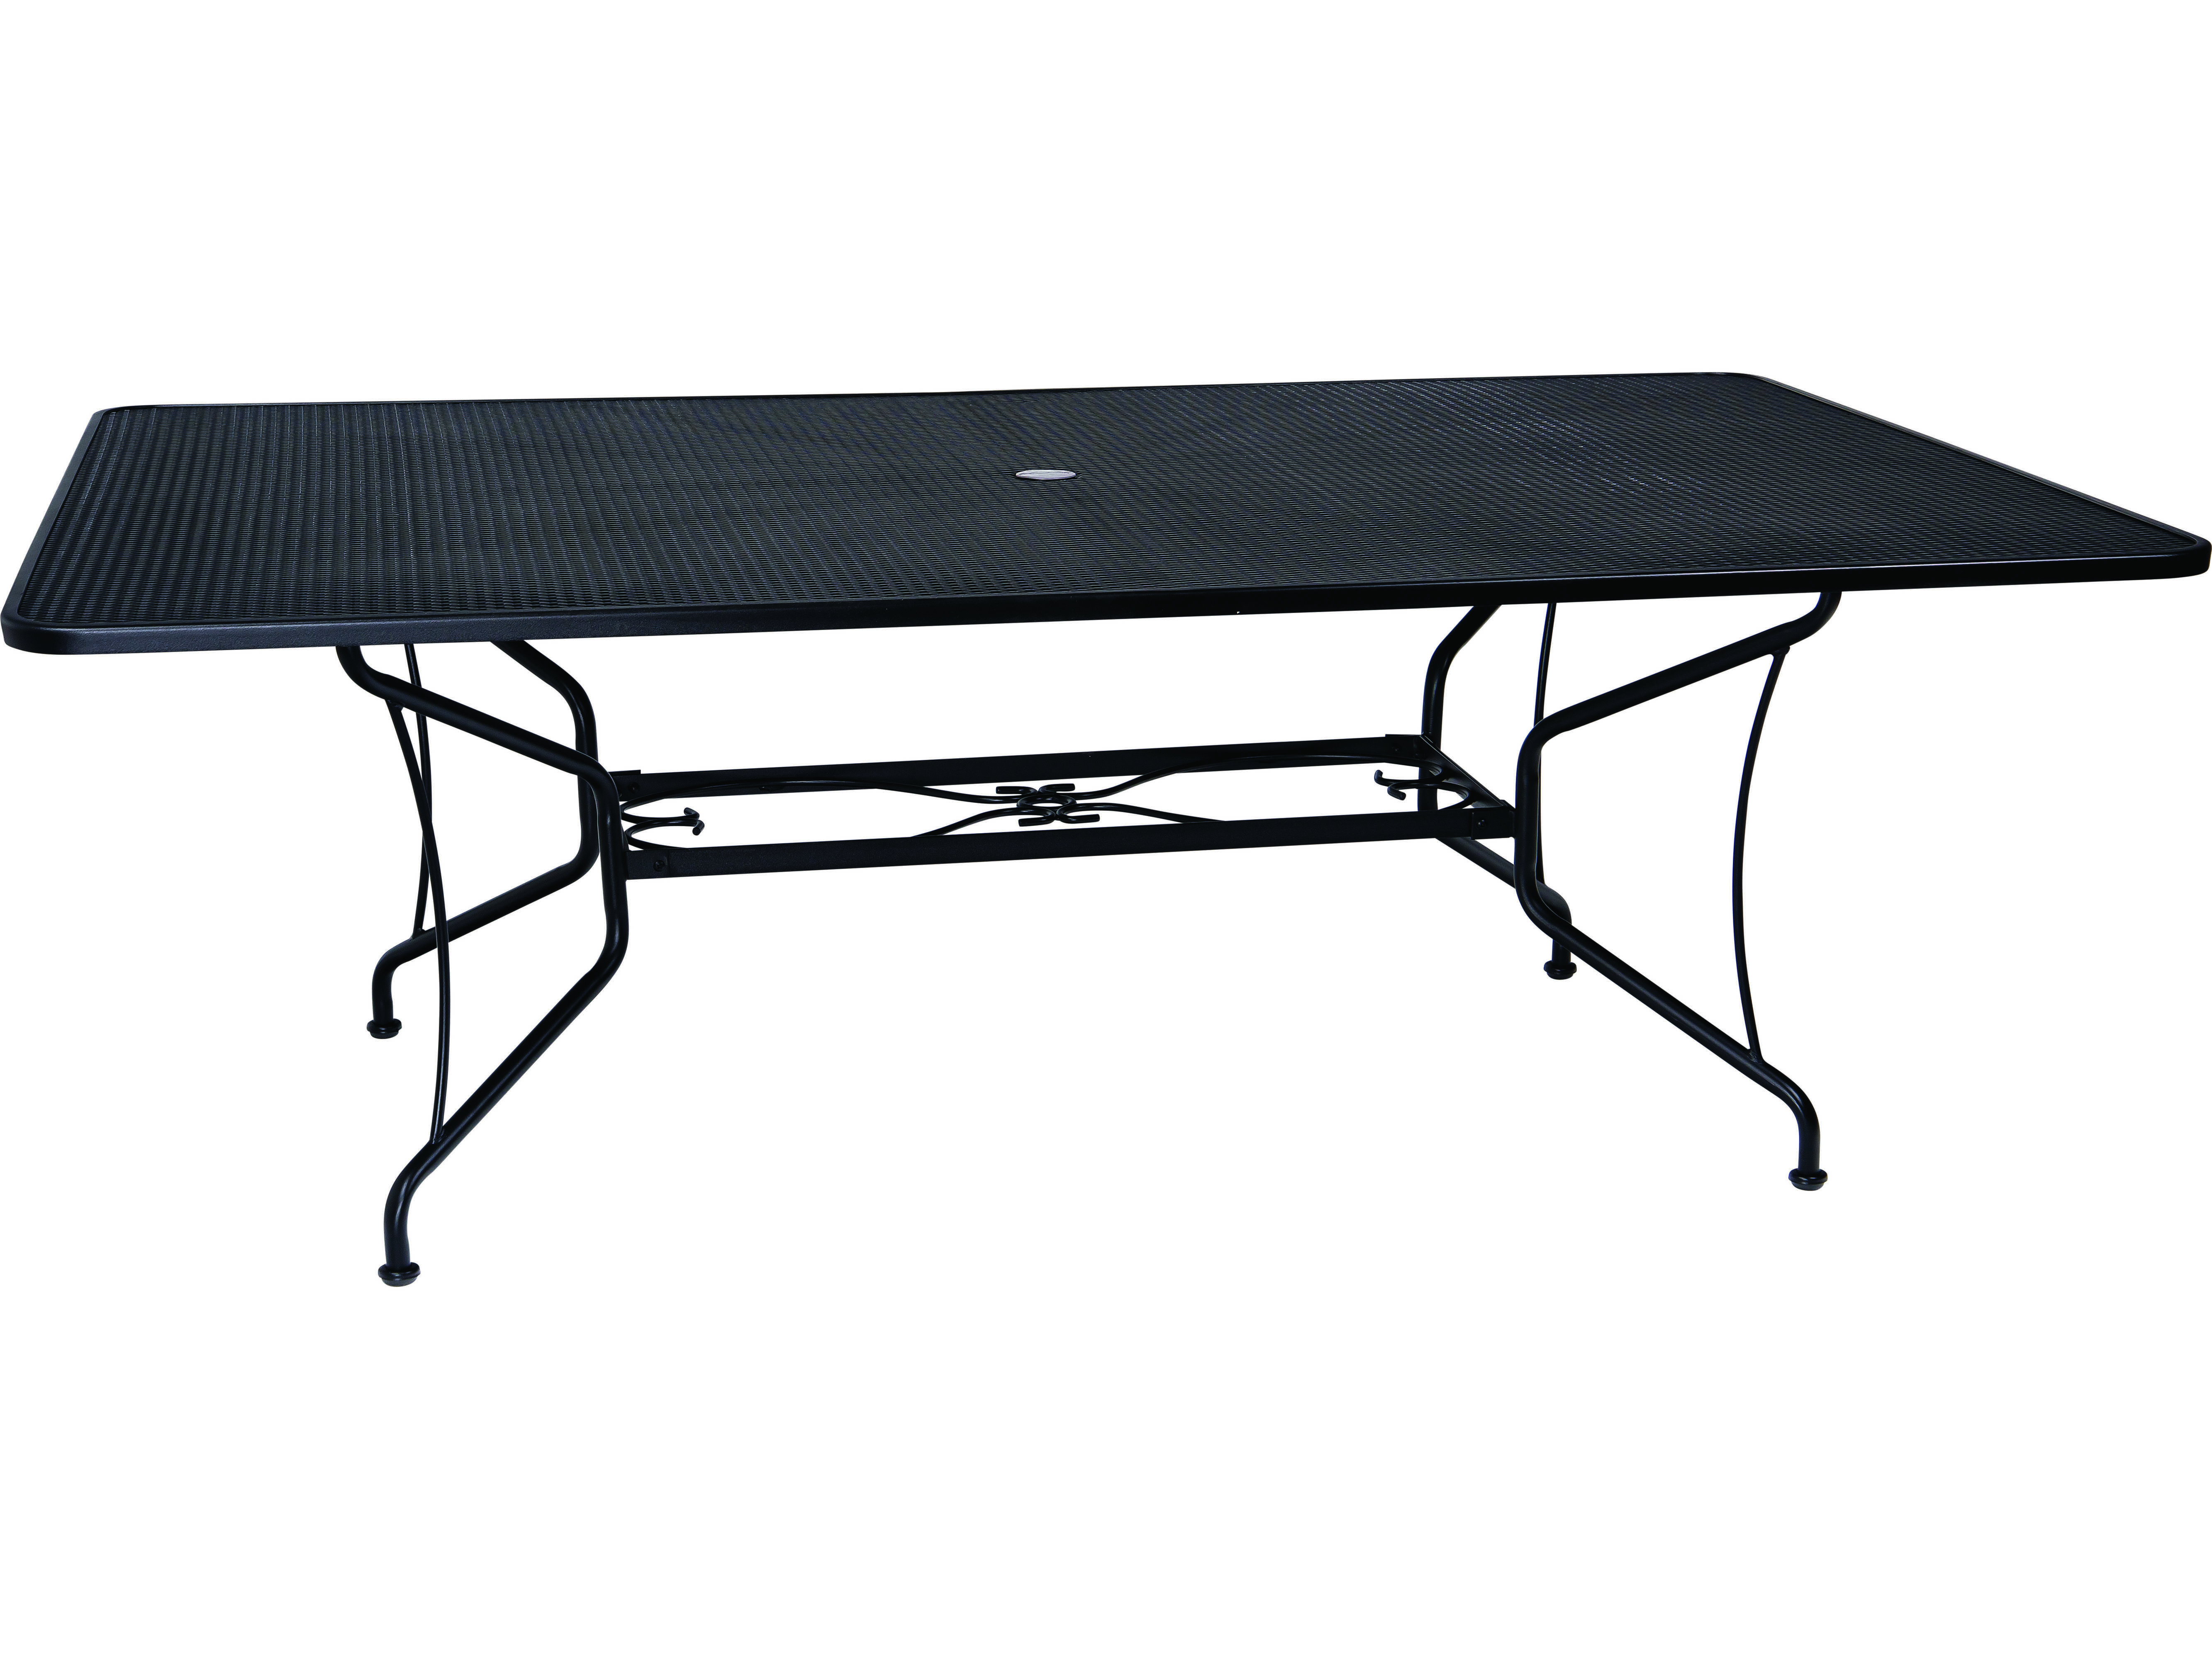 Rectangular Dining Table, Wrought Iron Patio Dining Table For 6